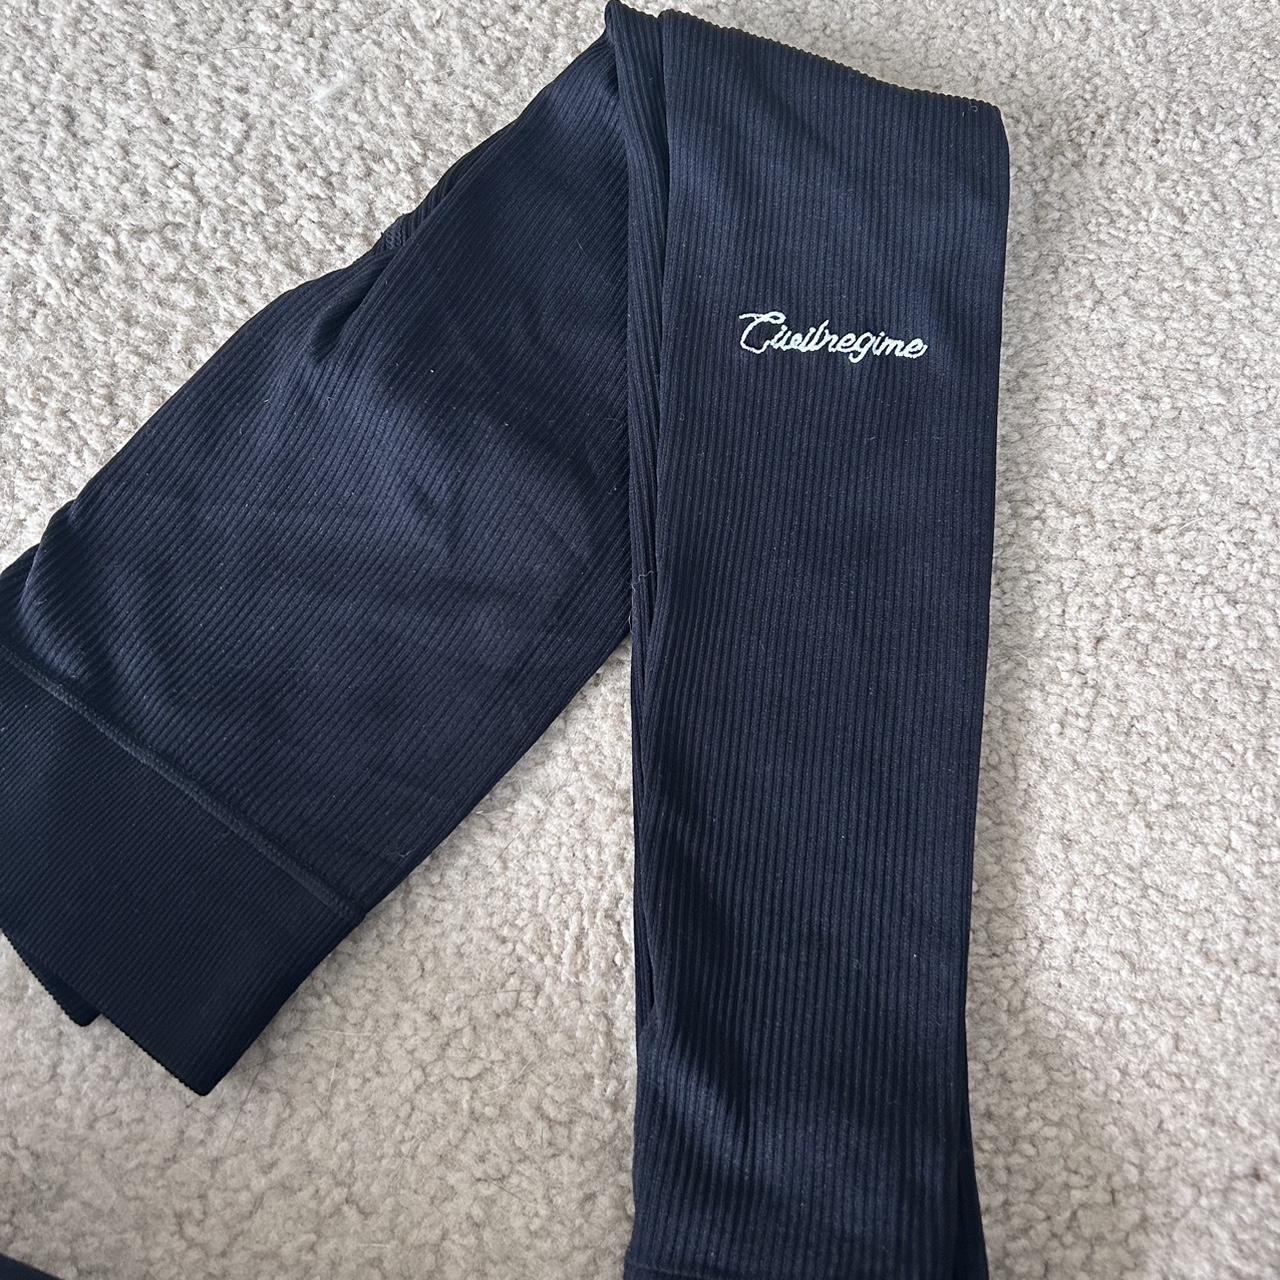 Civil Regime leggings , only worn once, too small for